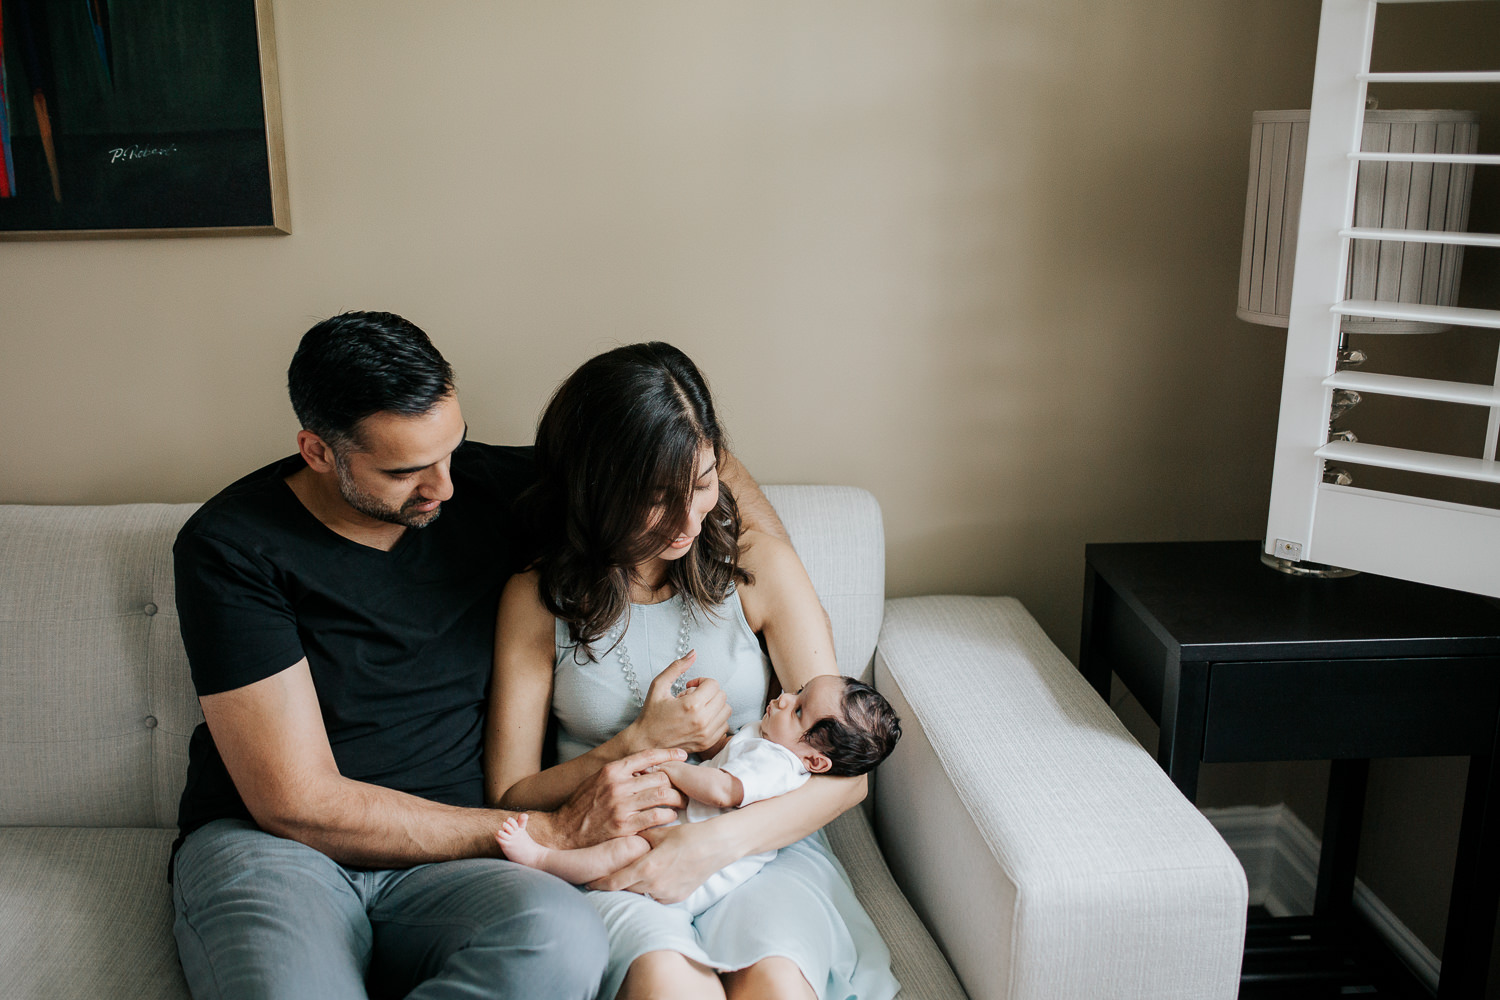 new mom sitting on couch snuggling 1 month old baby boy with dark hair in her arms, dad sitting let to wife with hand on son - GTA Lifestyle Photography